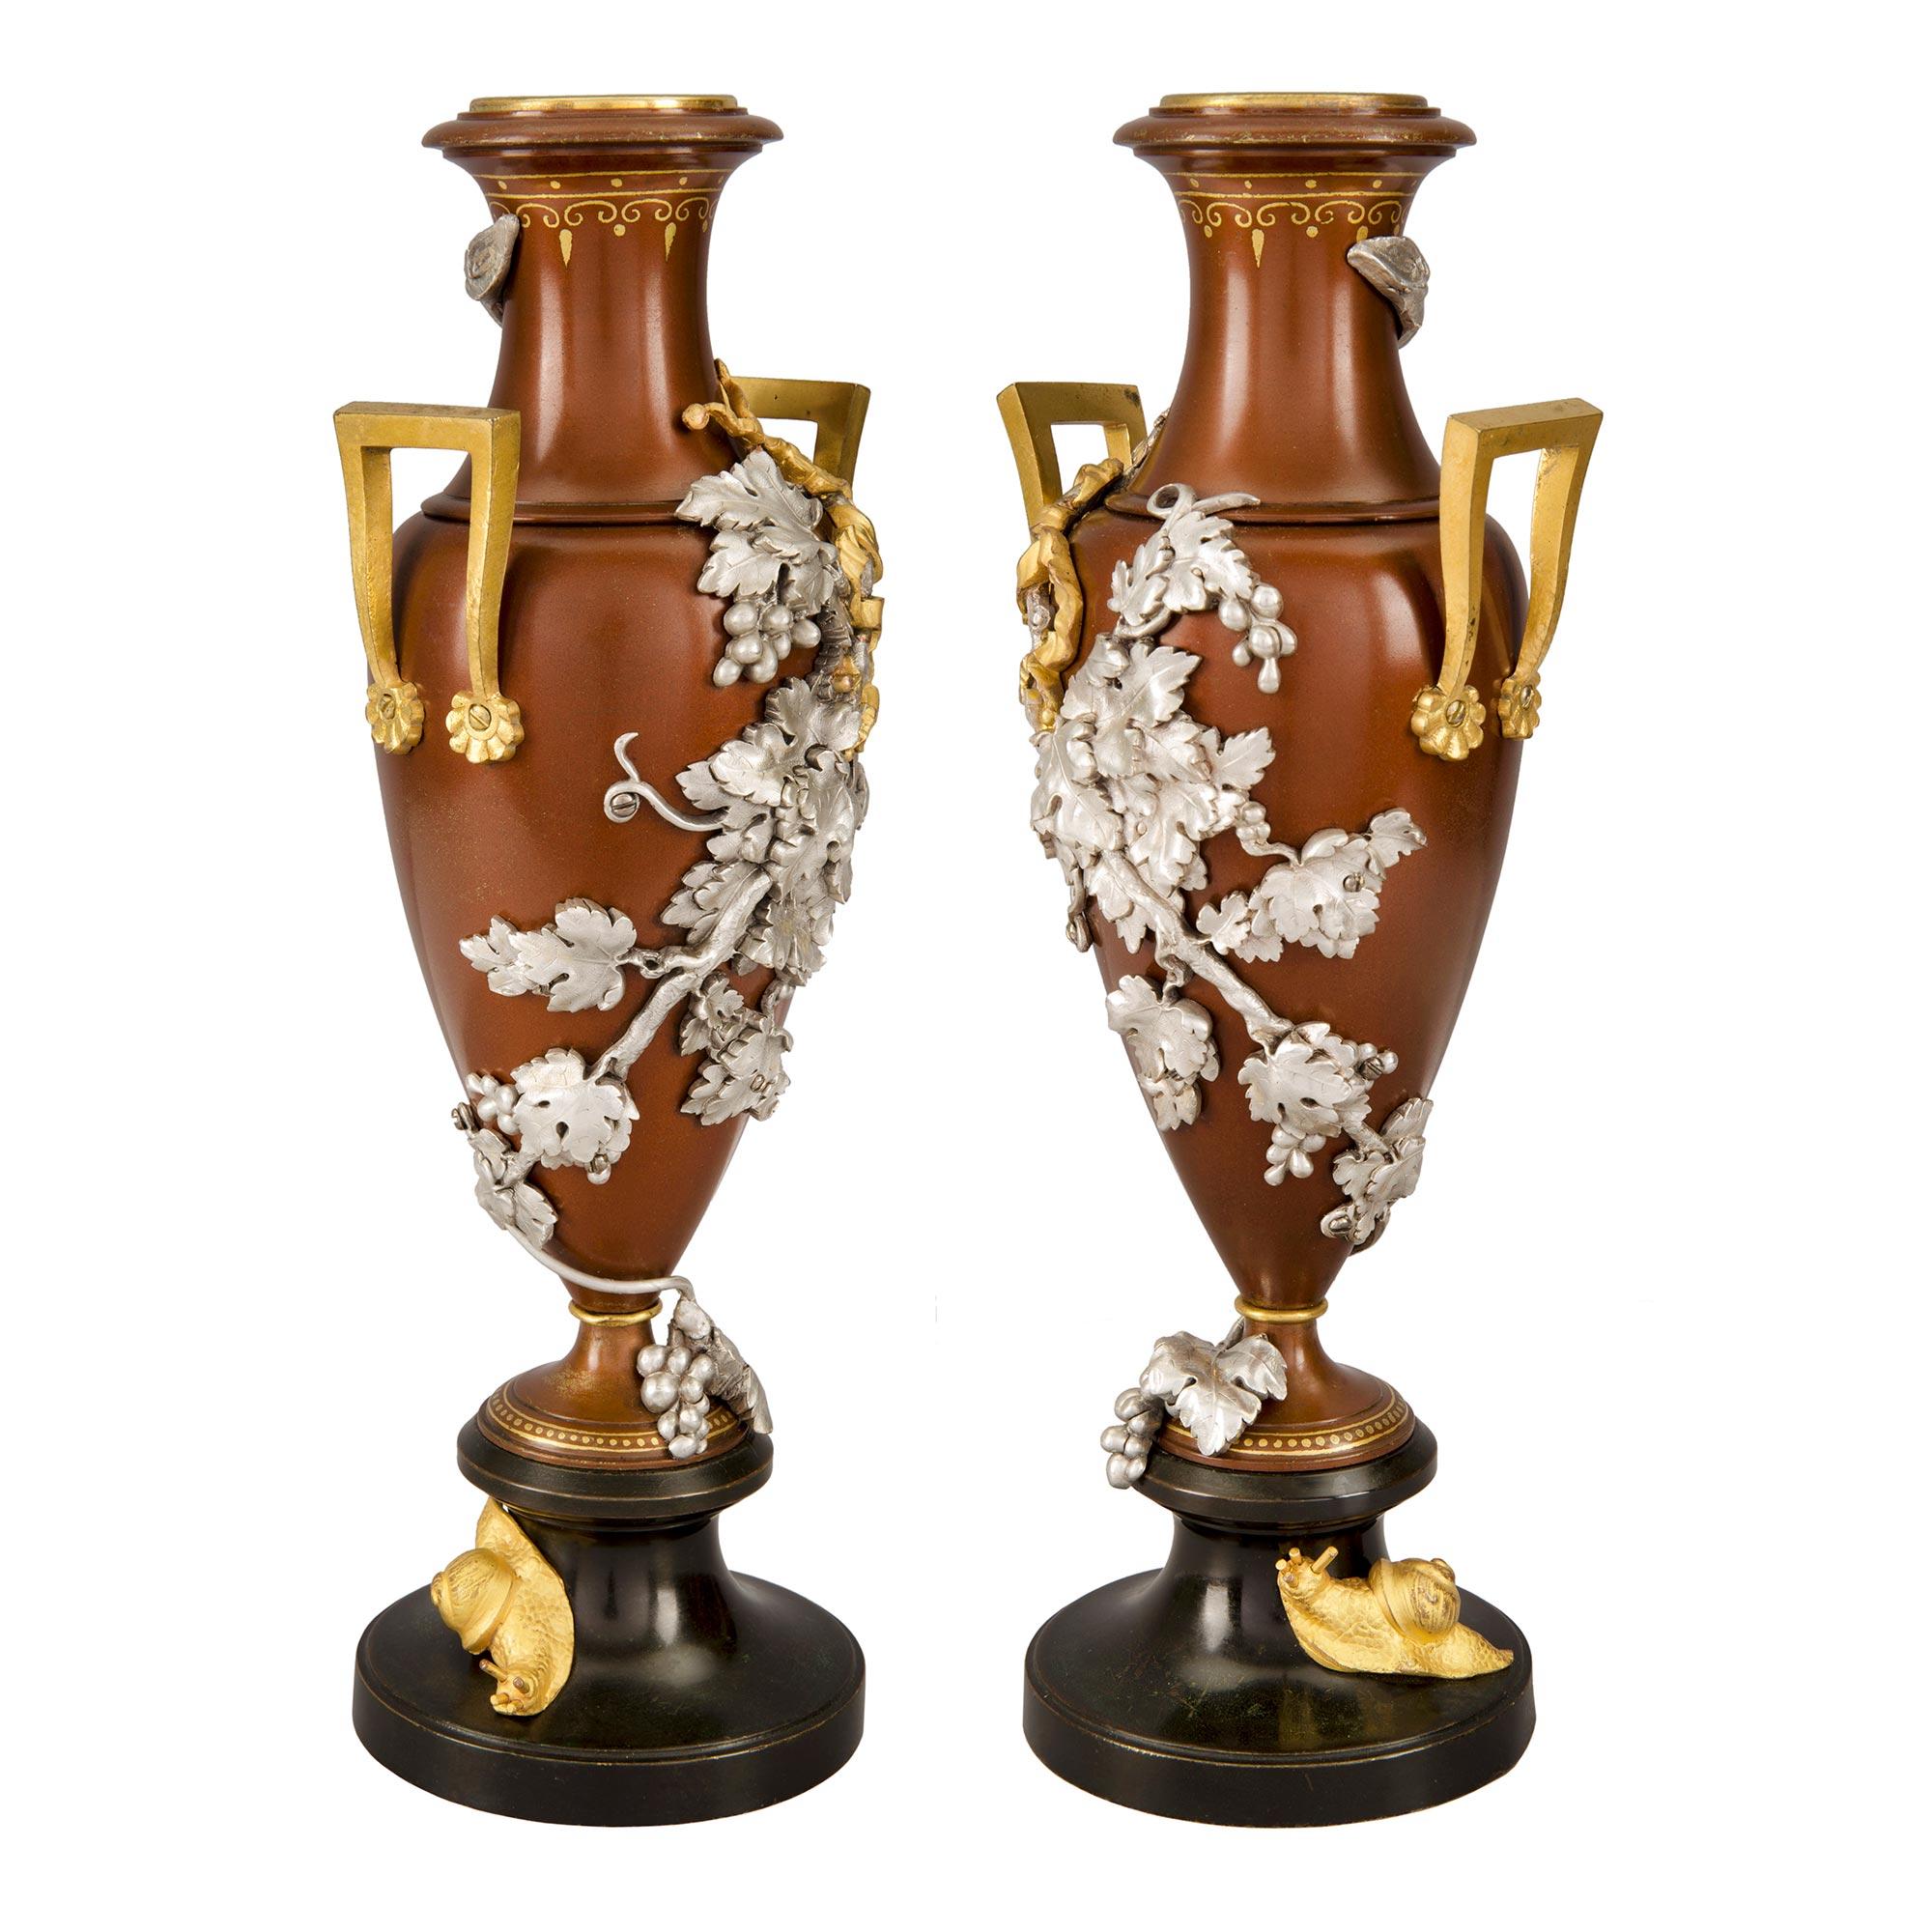 A stunning pair of French 19th century Louis XVI st. silvered bronze, ormolu and two toned patinated bronze urns. Each lovely urn is raised by a patinated bronze socle pedestal with a charming and richly chased ormolu snail at the side. The elegant